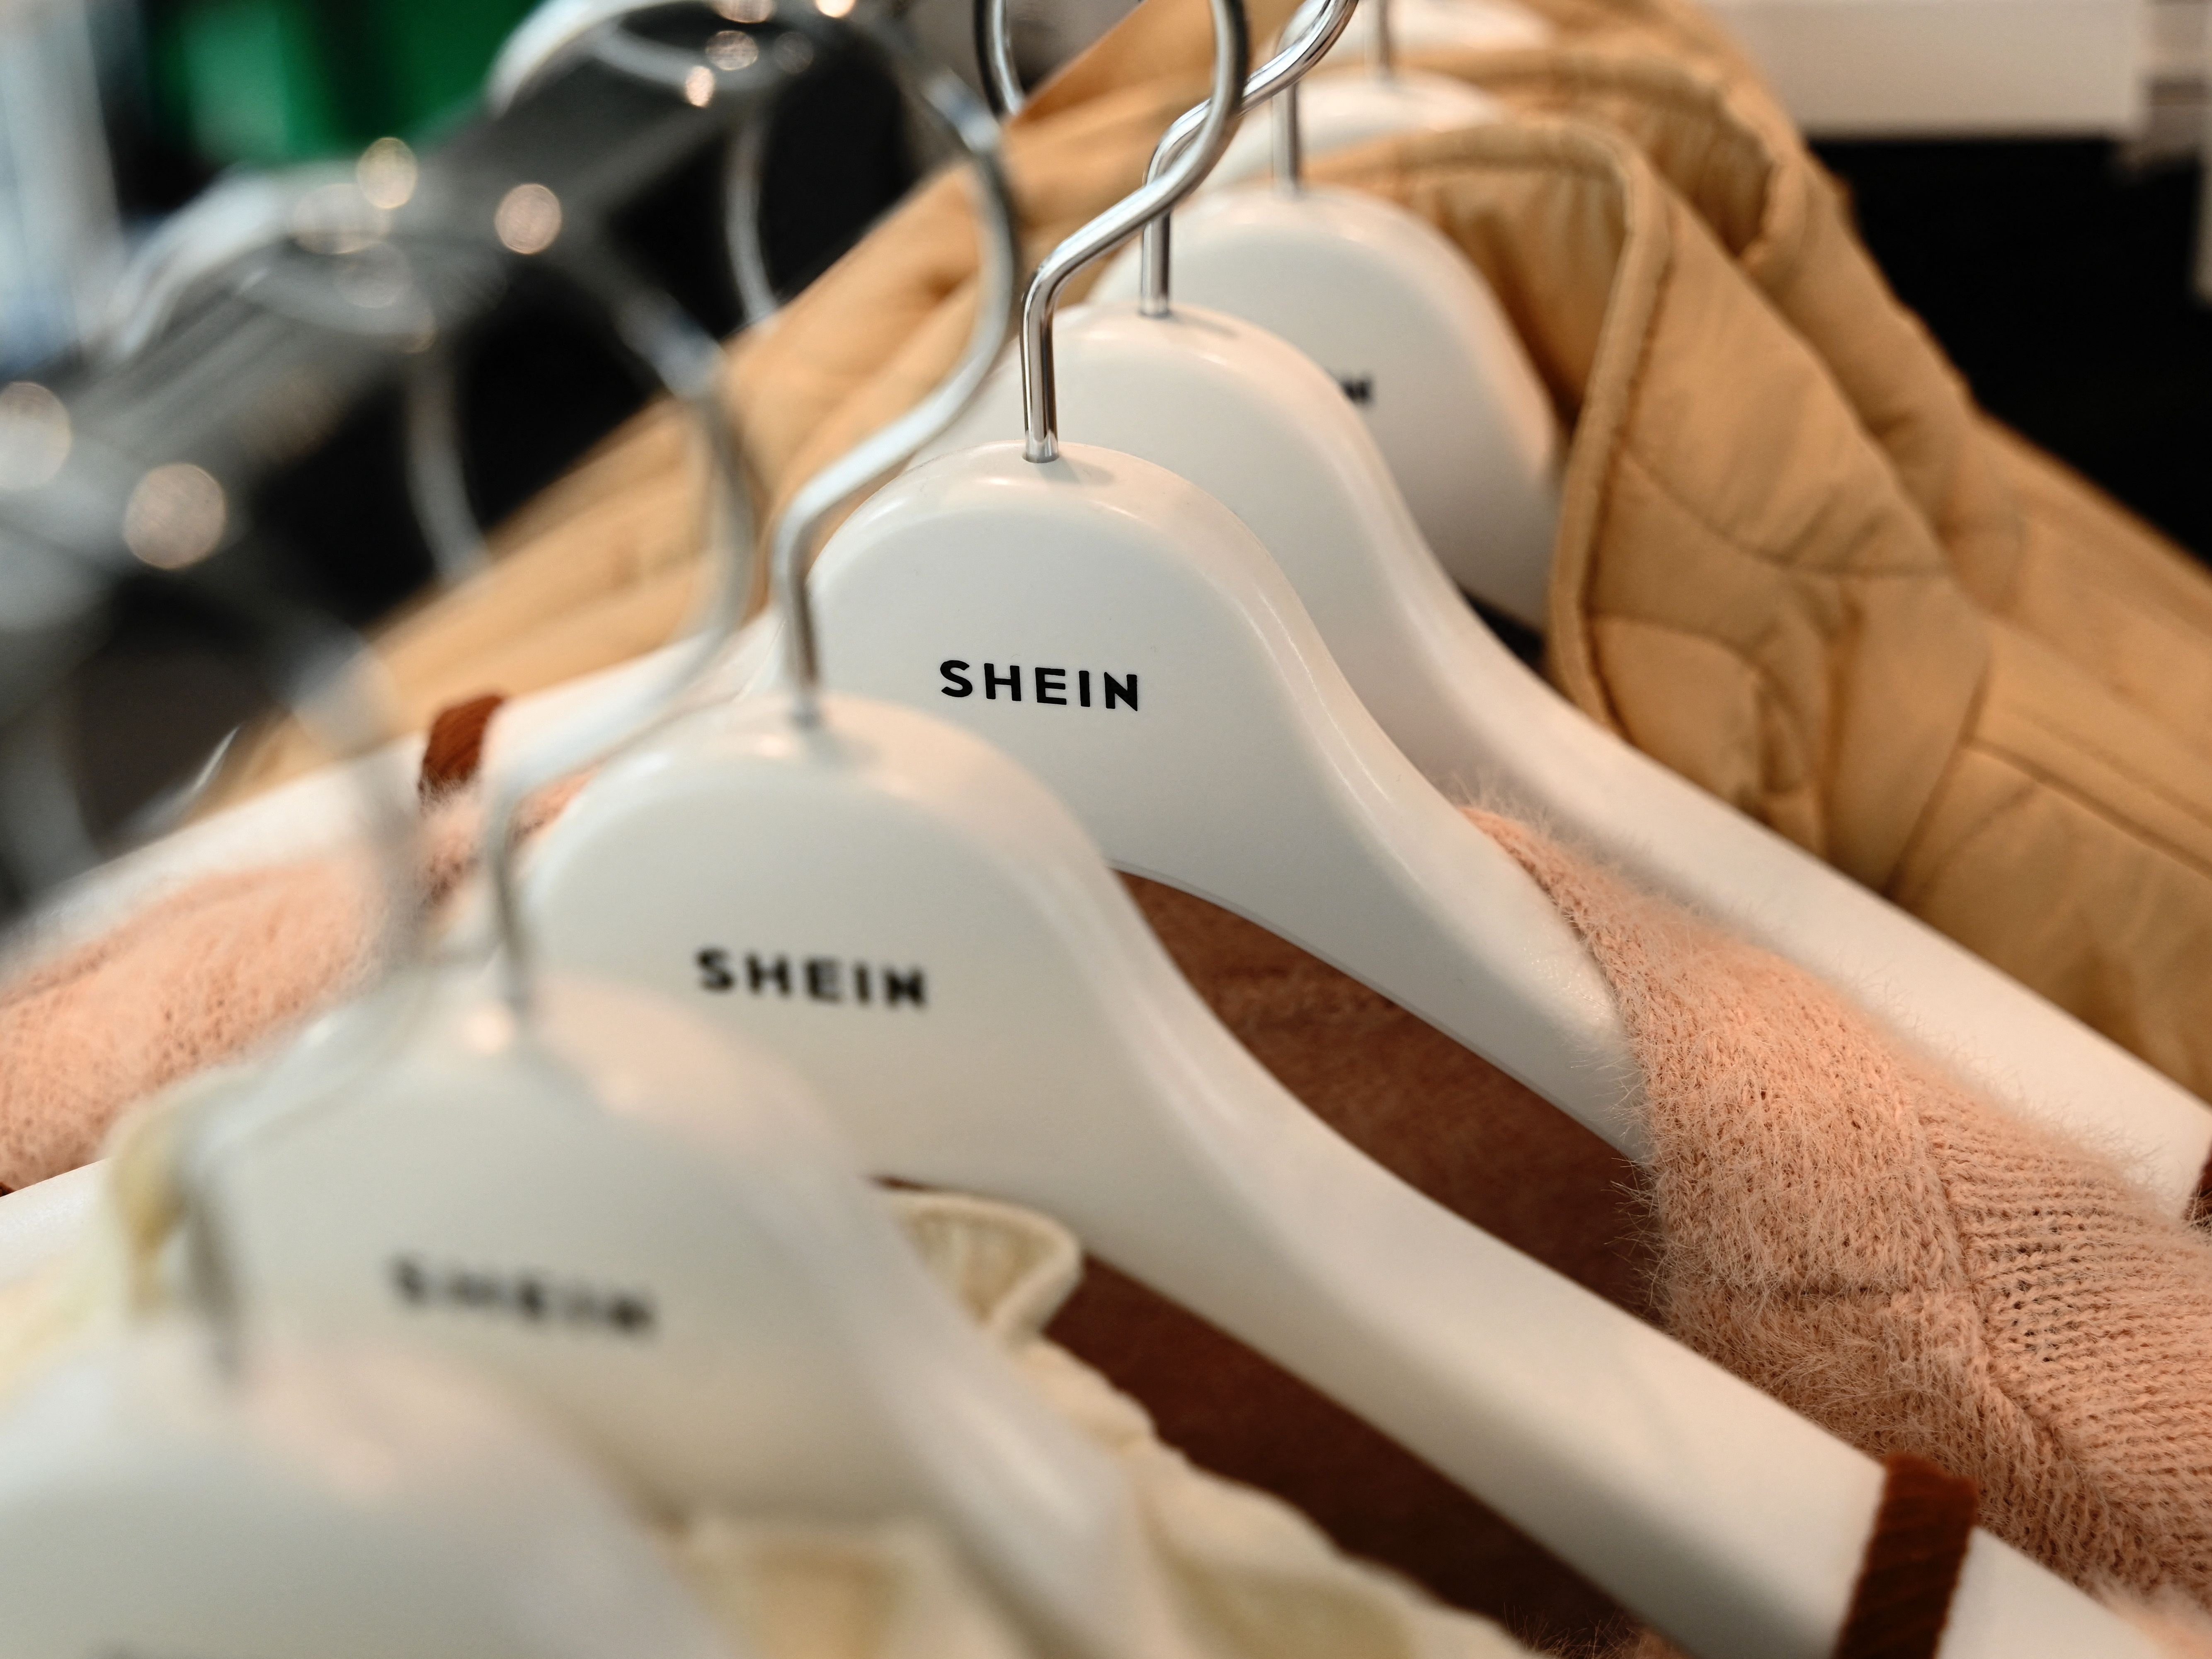 Shein could be London’s biggest ever IPO